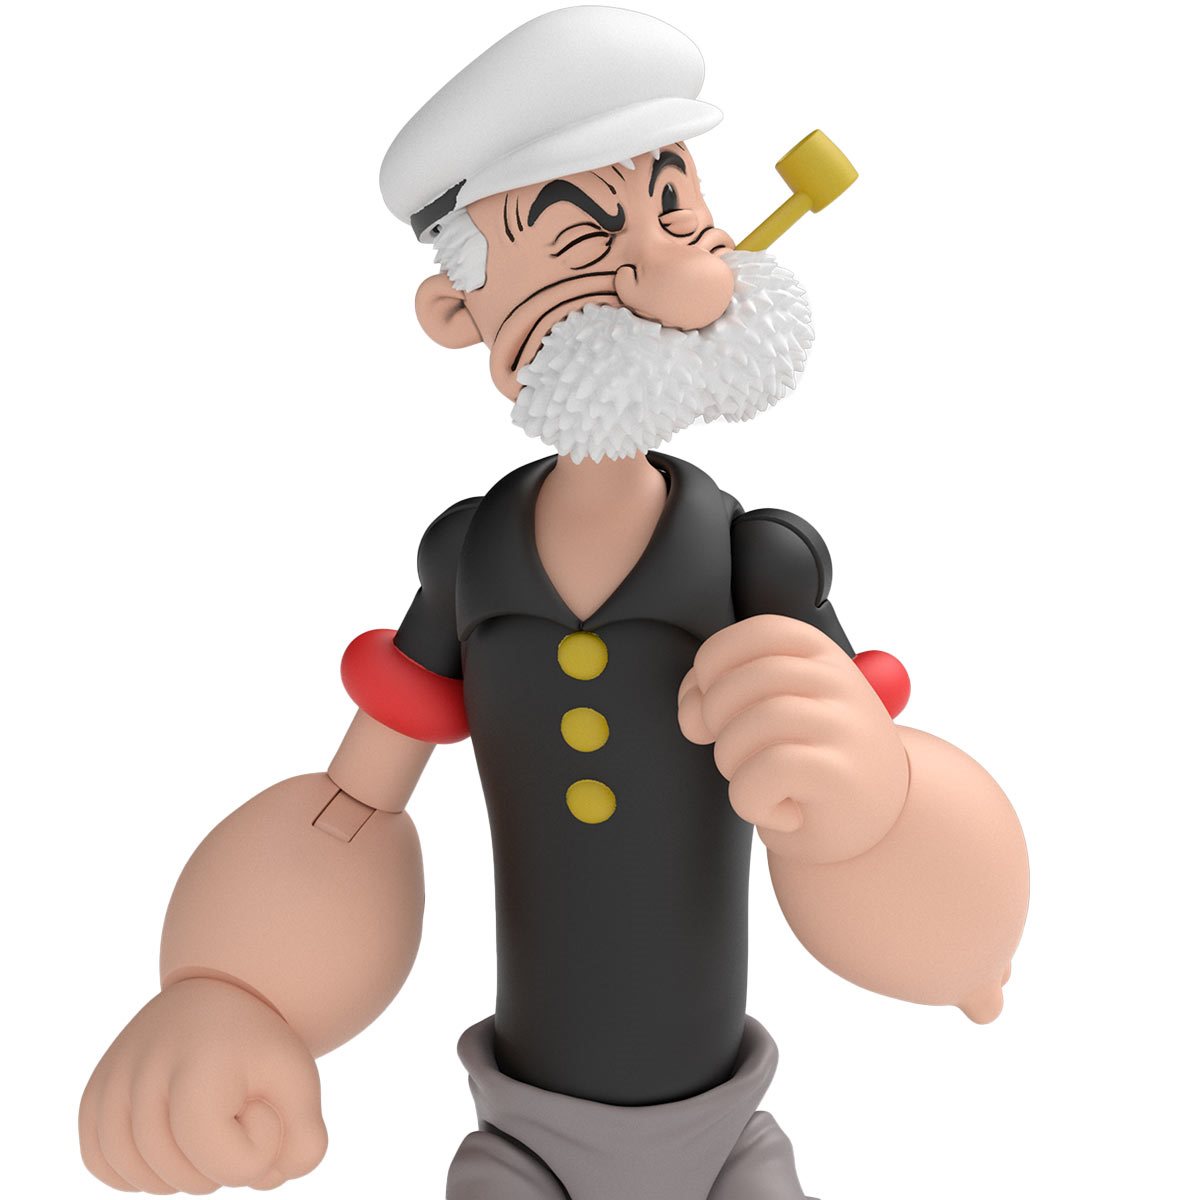 Popeye Classics Wave 2 Poopdeck Pappy 1:12 Scale Action Figure By Boss Fight Studio